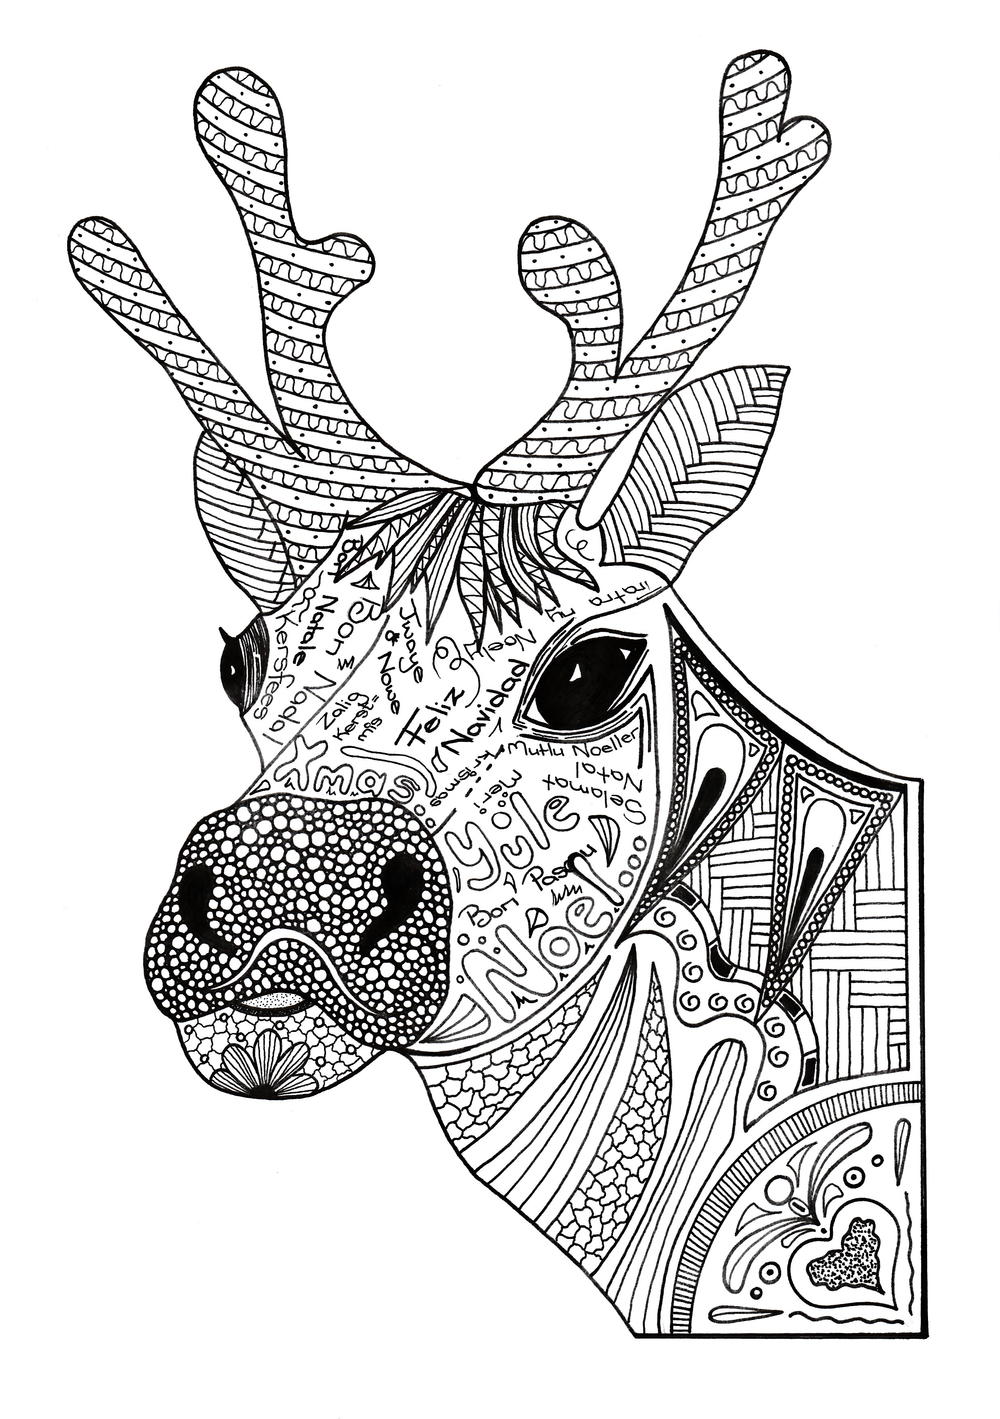 drawing sheet blank Page  Adult Christmas Coloring FaveCrafts.com Reindeer